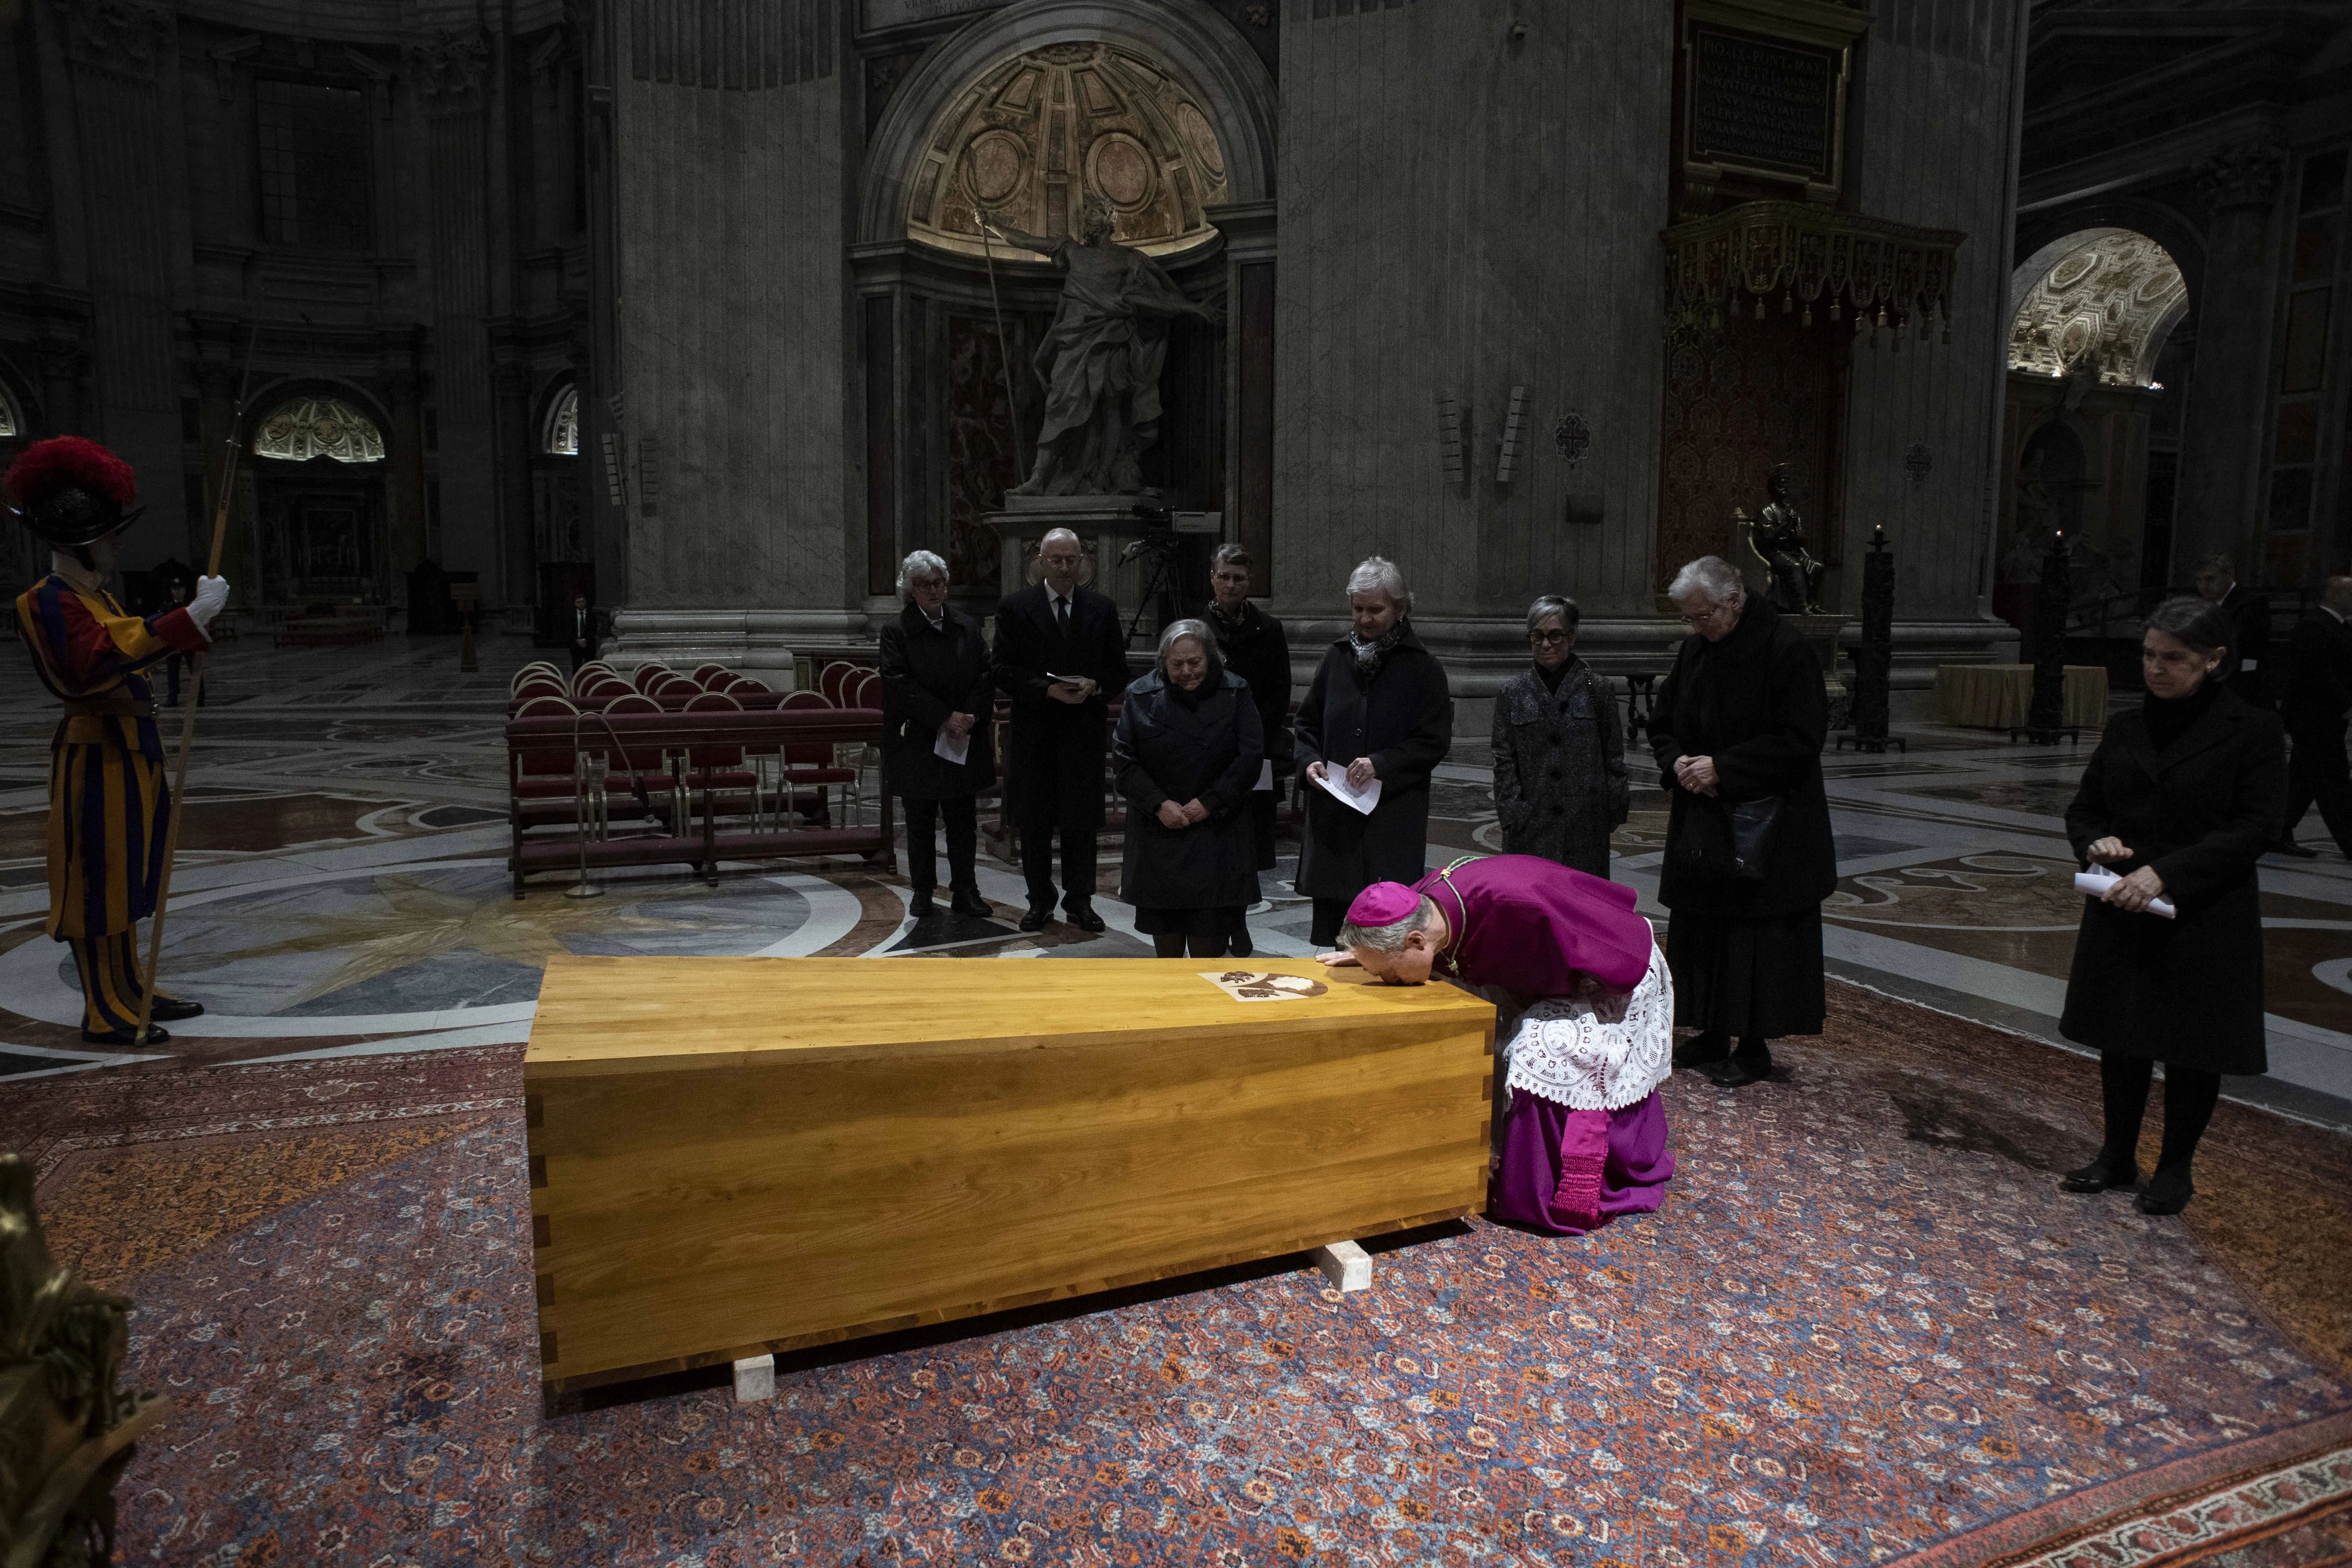 Benedict XVI’s personal secretary Archbishop Georg Gänswein kisses the former pope's closed coffin during a private ceremony in St. Peter's Basilica on Jan. 4, 2023. Vatican Media